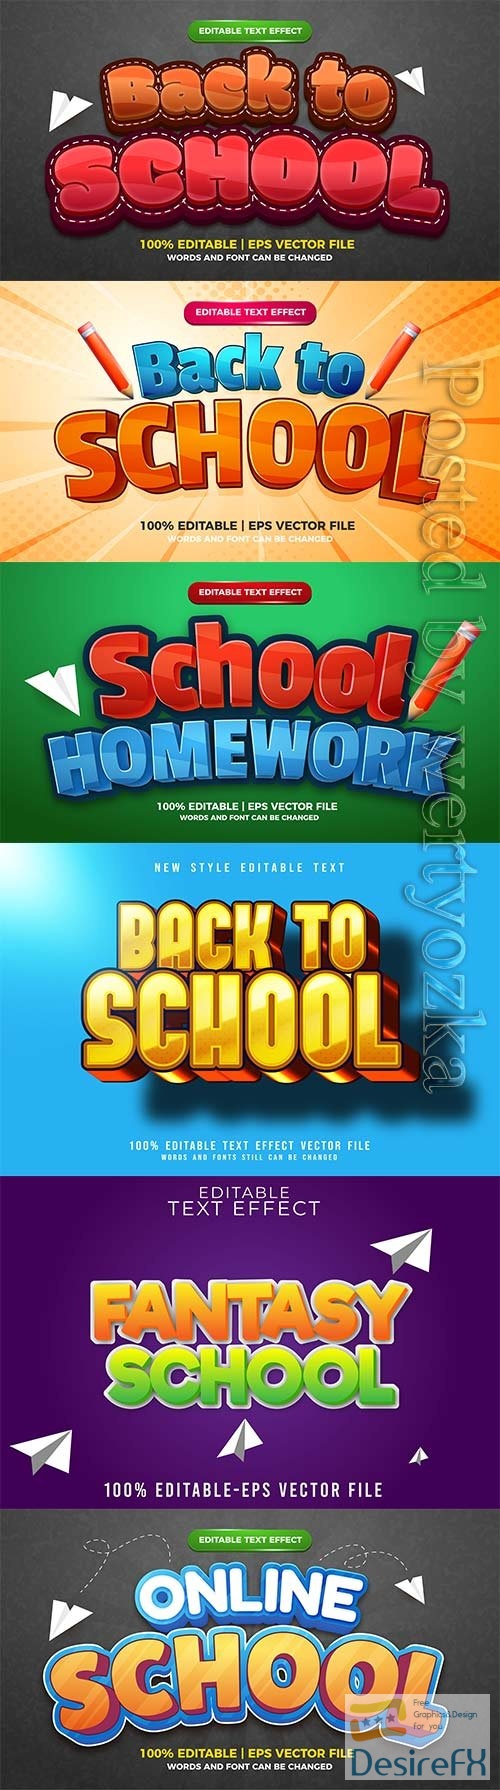 Back to school editable text effect vol 16